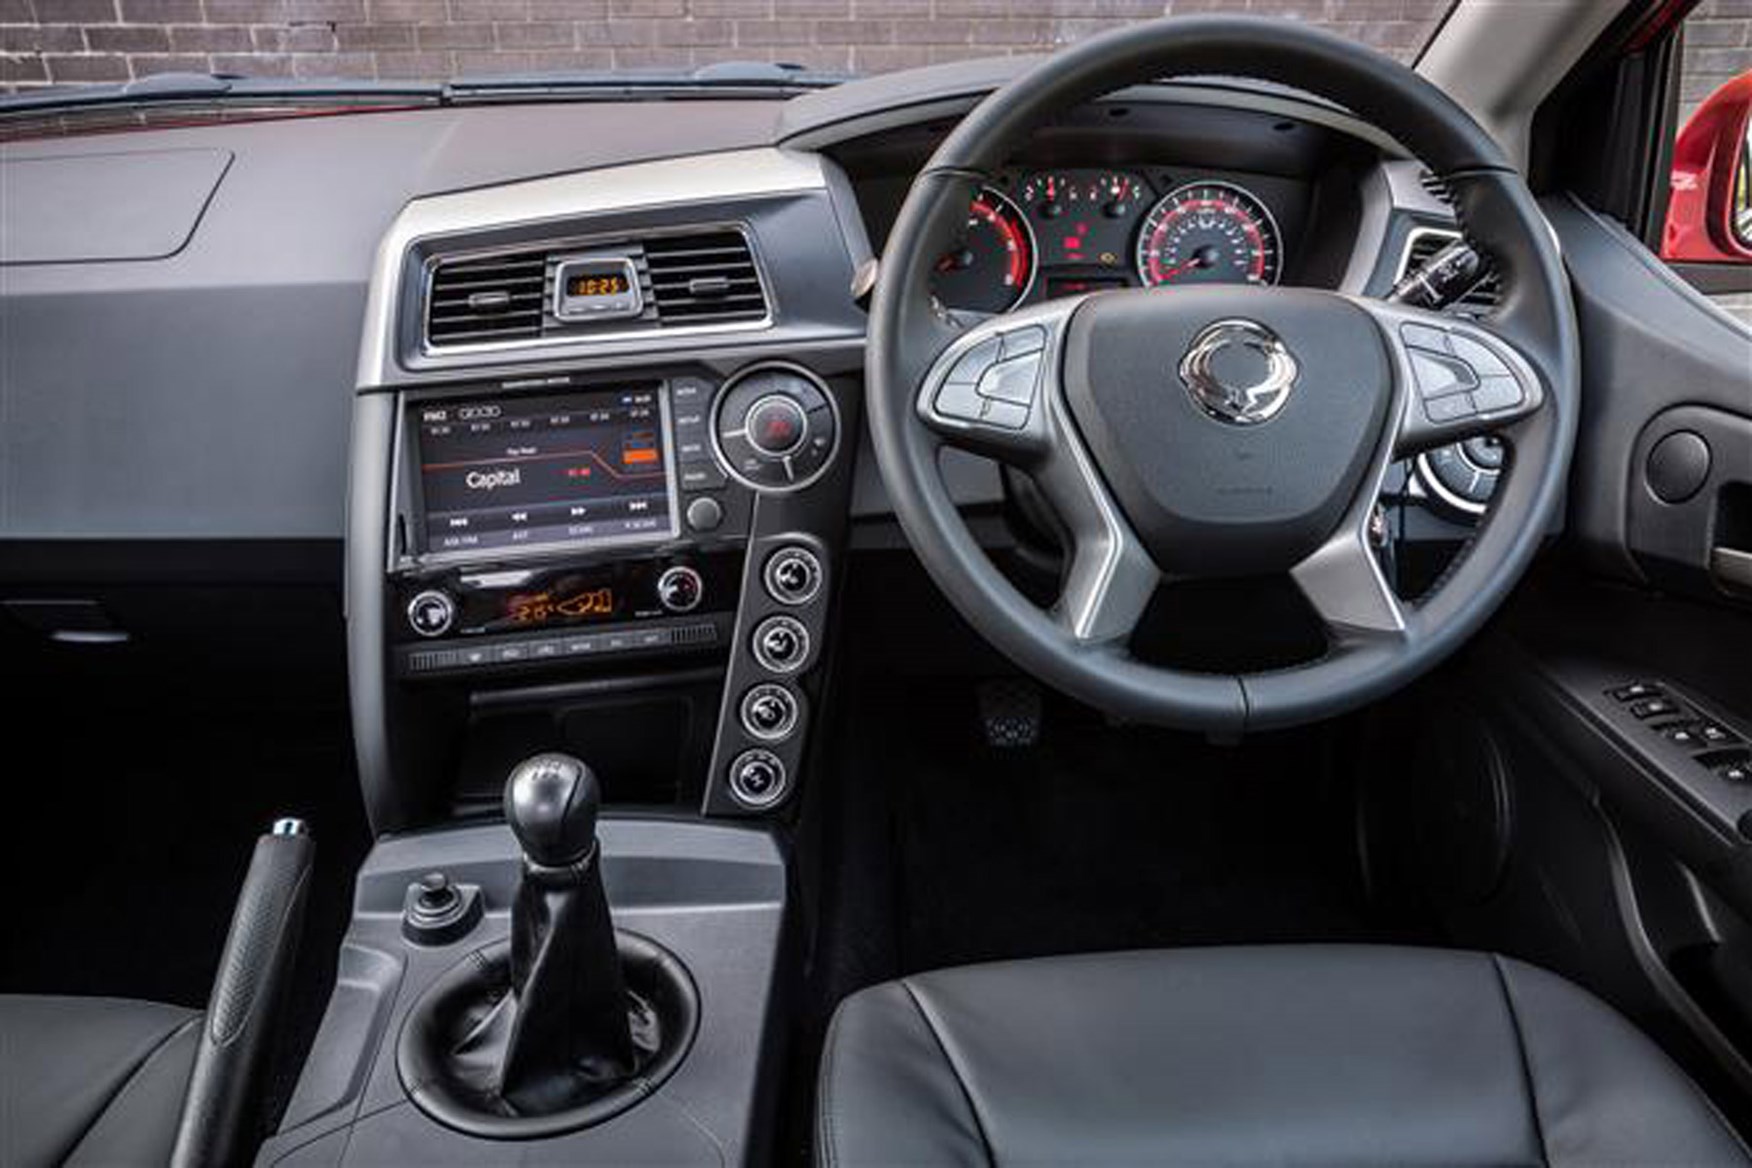 SsangYong Musso full review on Parkers Vans - in the driver's seat